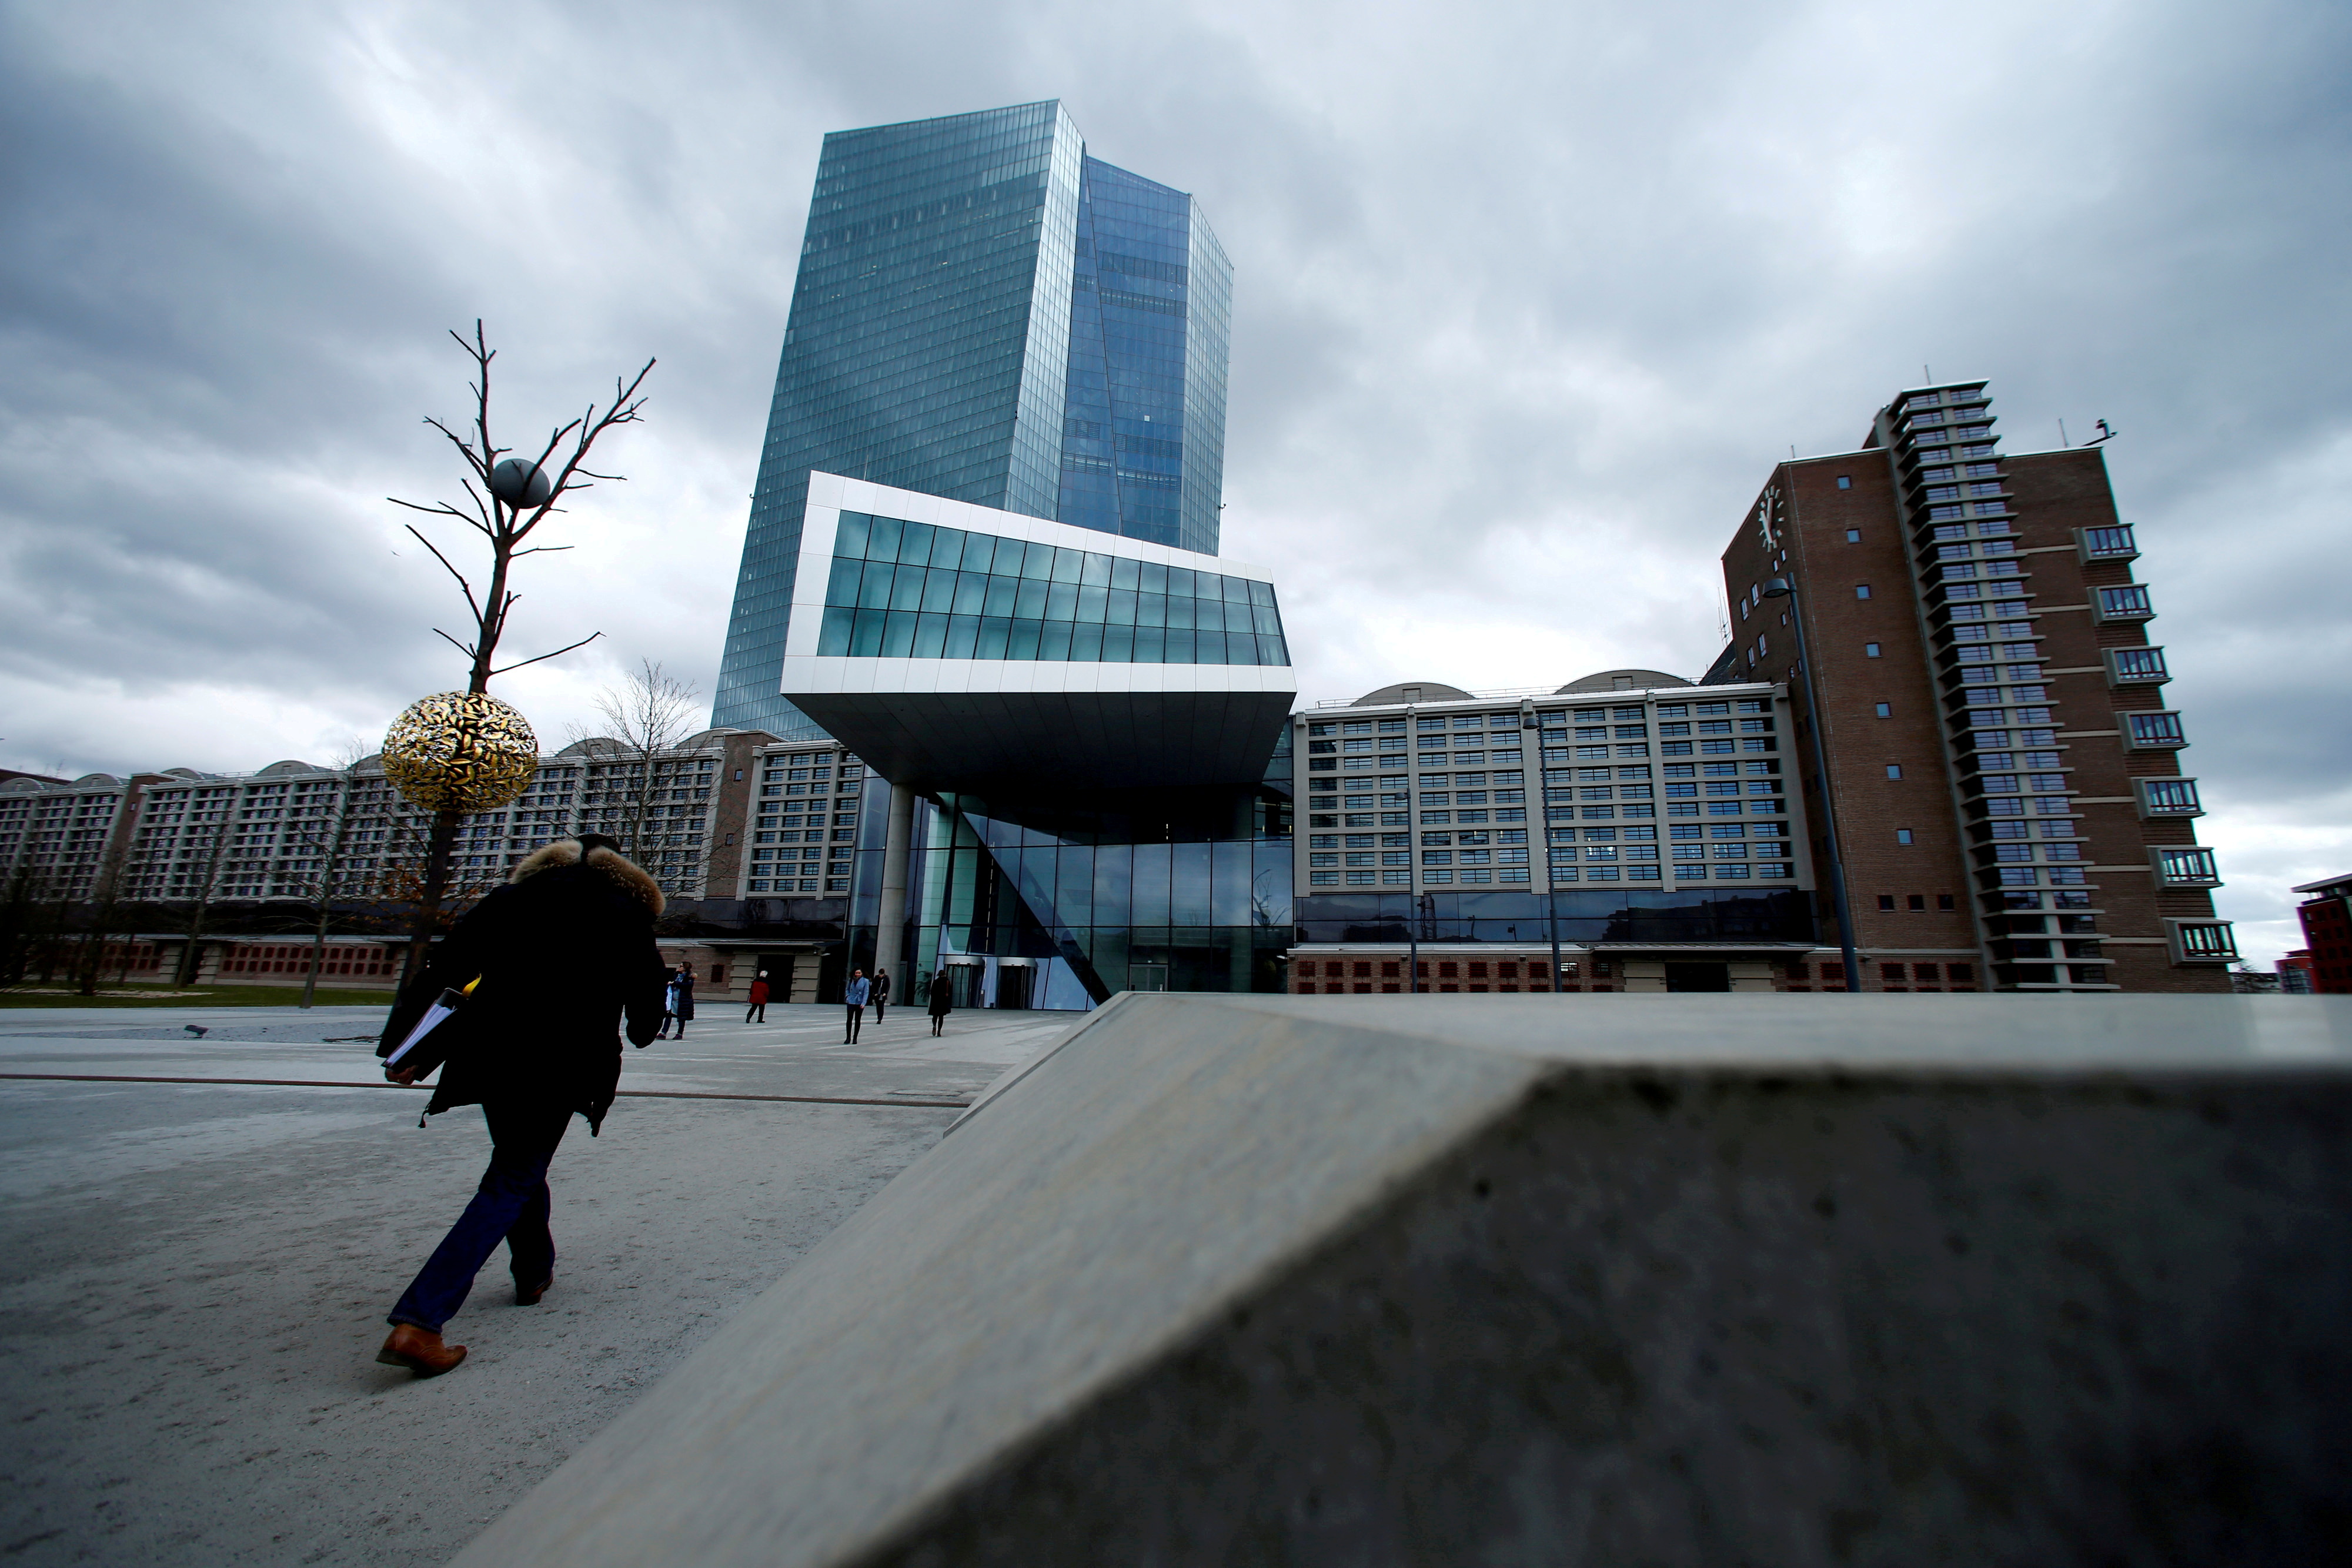 European Central Bank (ECB) headquarters building is seen in Frankfurt, Germany, March 7, 2018. REUTERS/Ralph Orlowski/File Photo